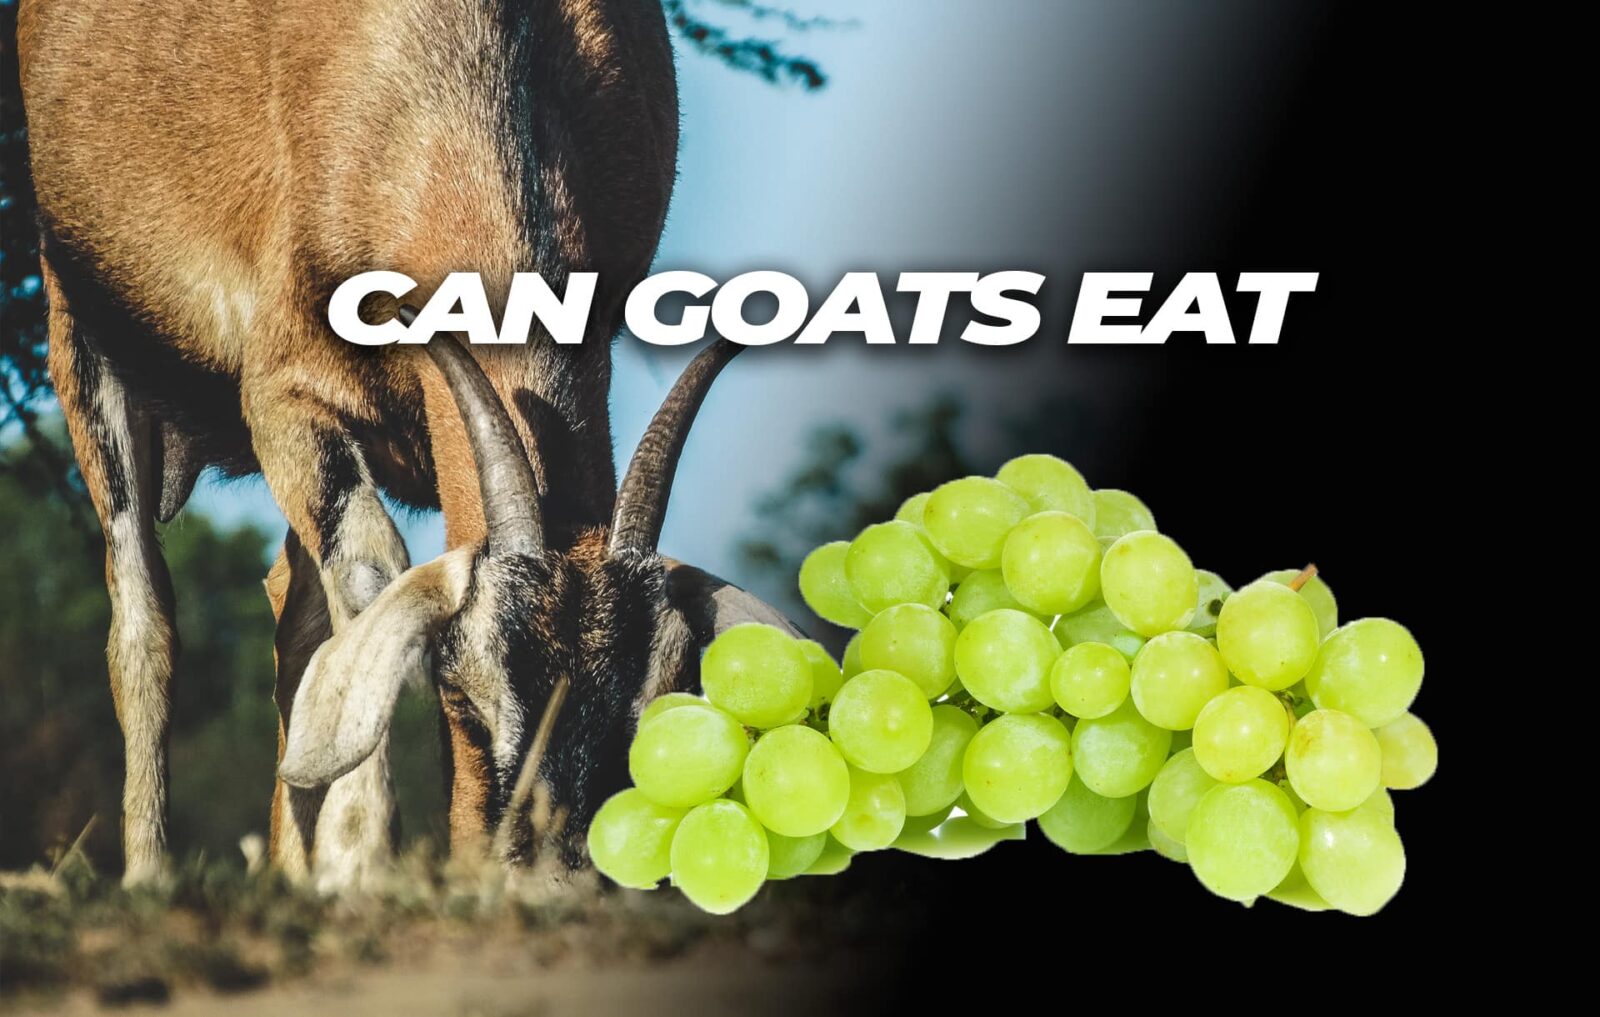 Can goats eat grapes